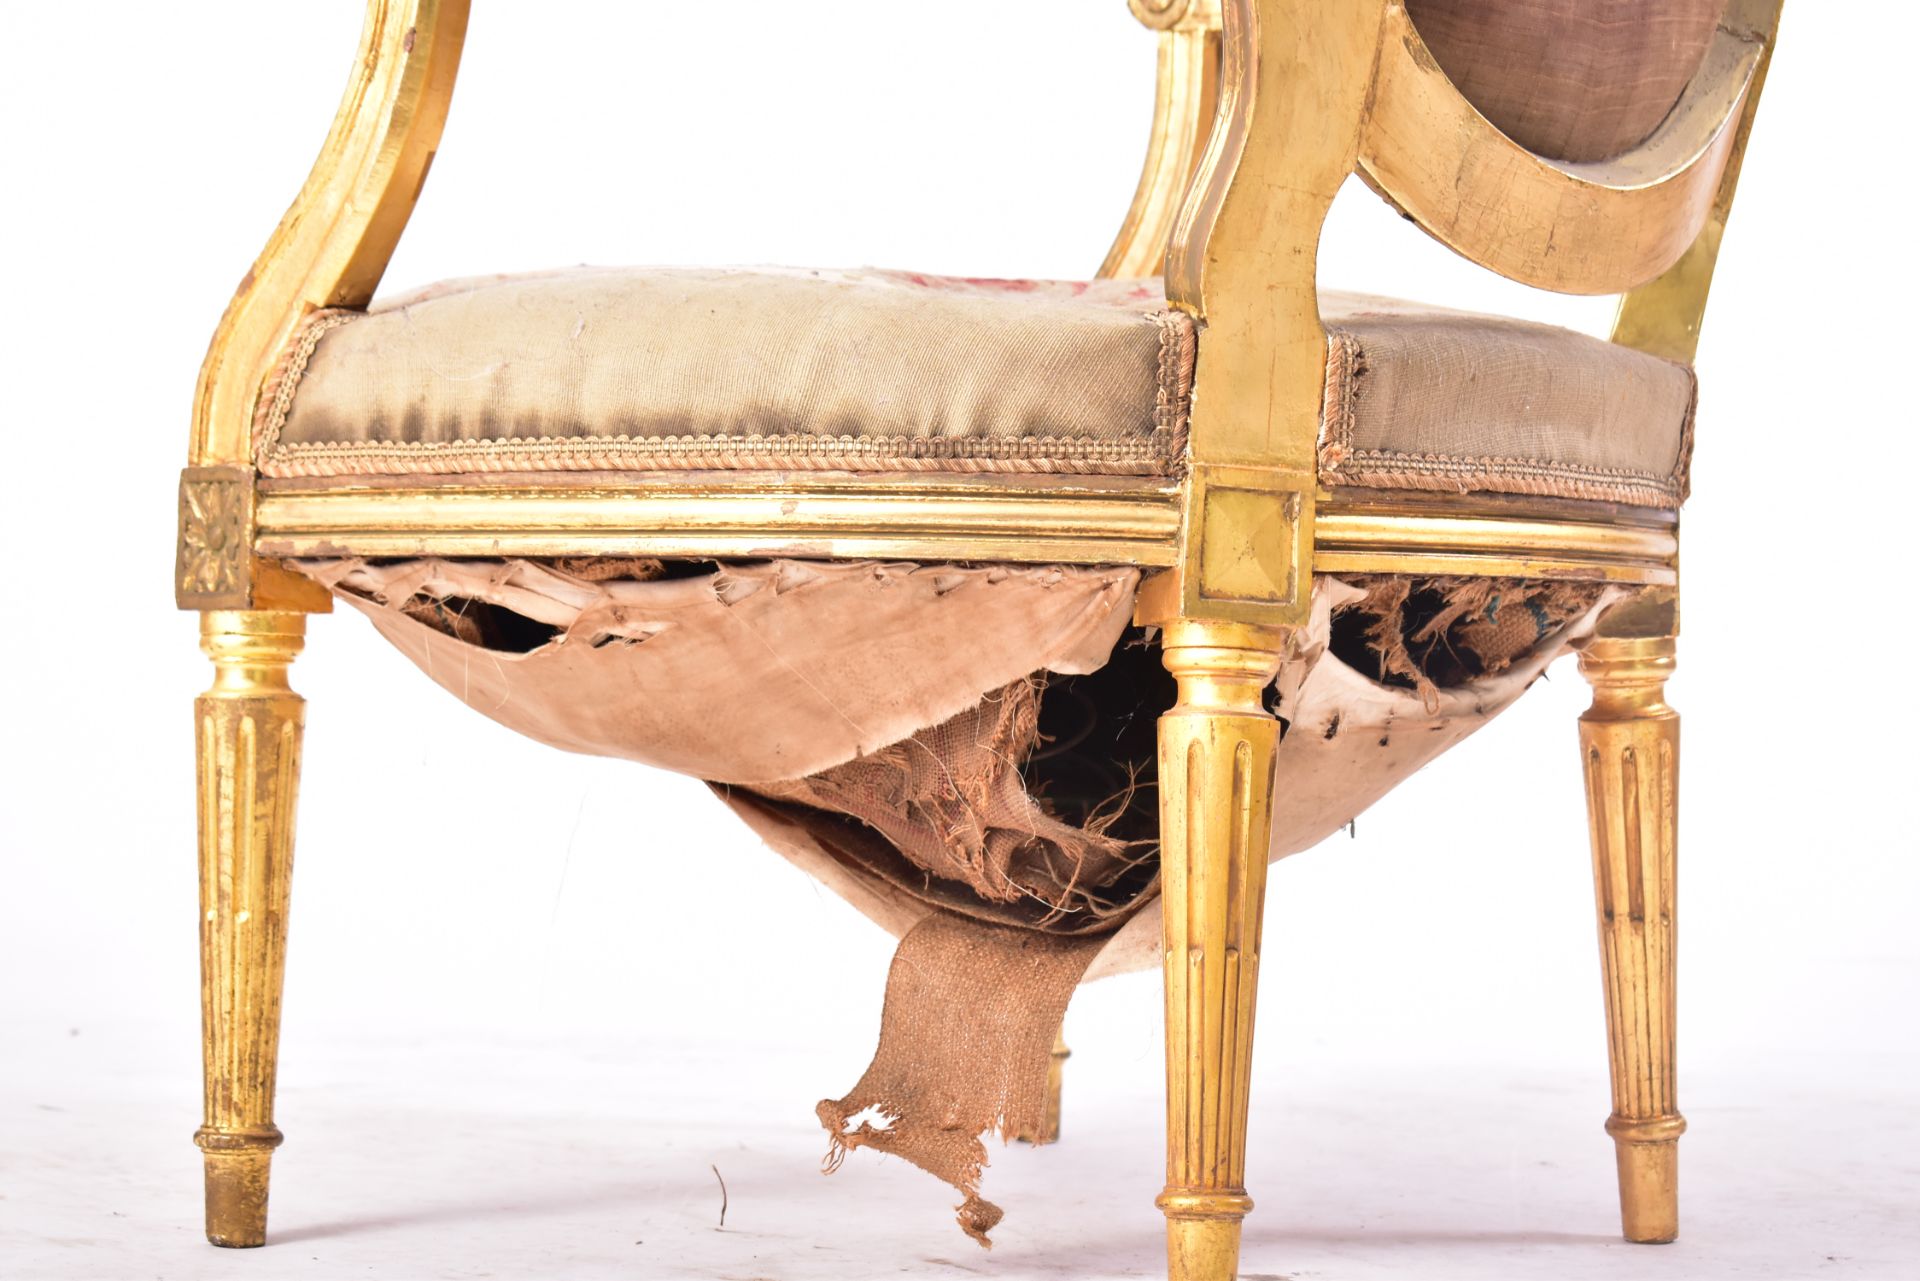 19TH CENTURY FRENCH GILTWOOD ELBOW CHAIR - Image 6 of 6